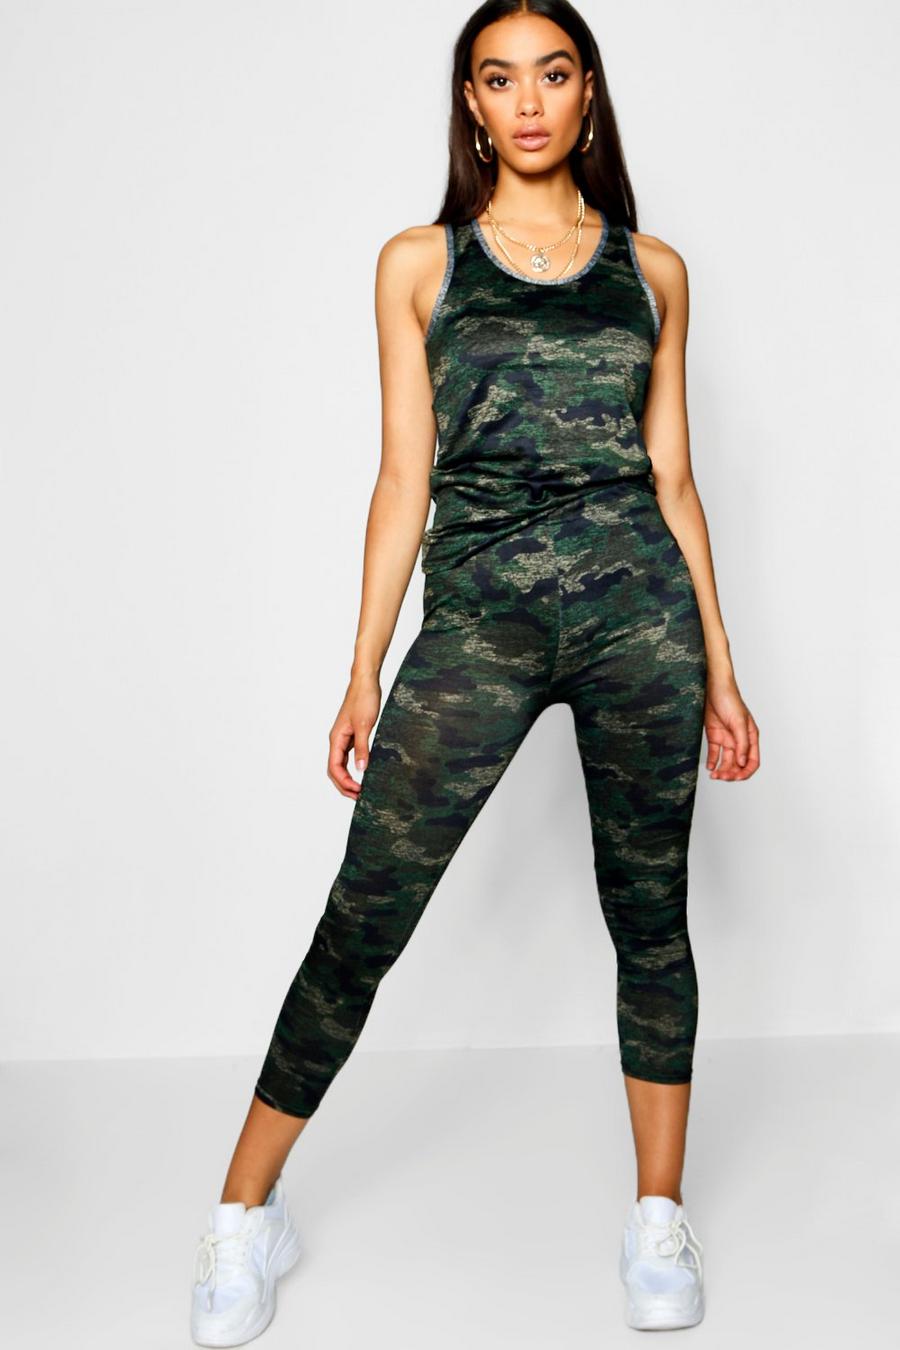 Green Camo Print Sports Tank Top Top And Leggings image number 1